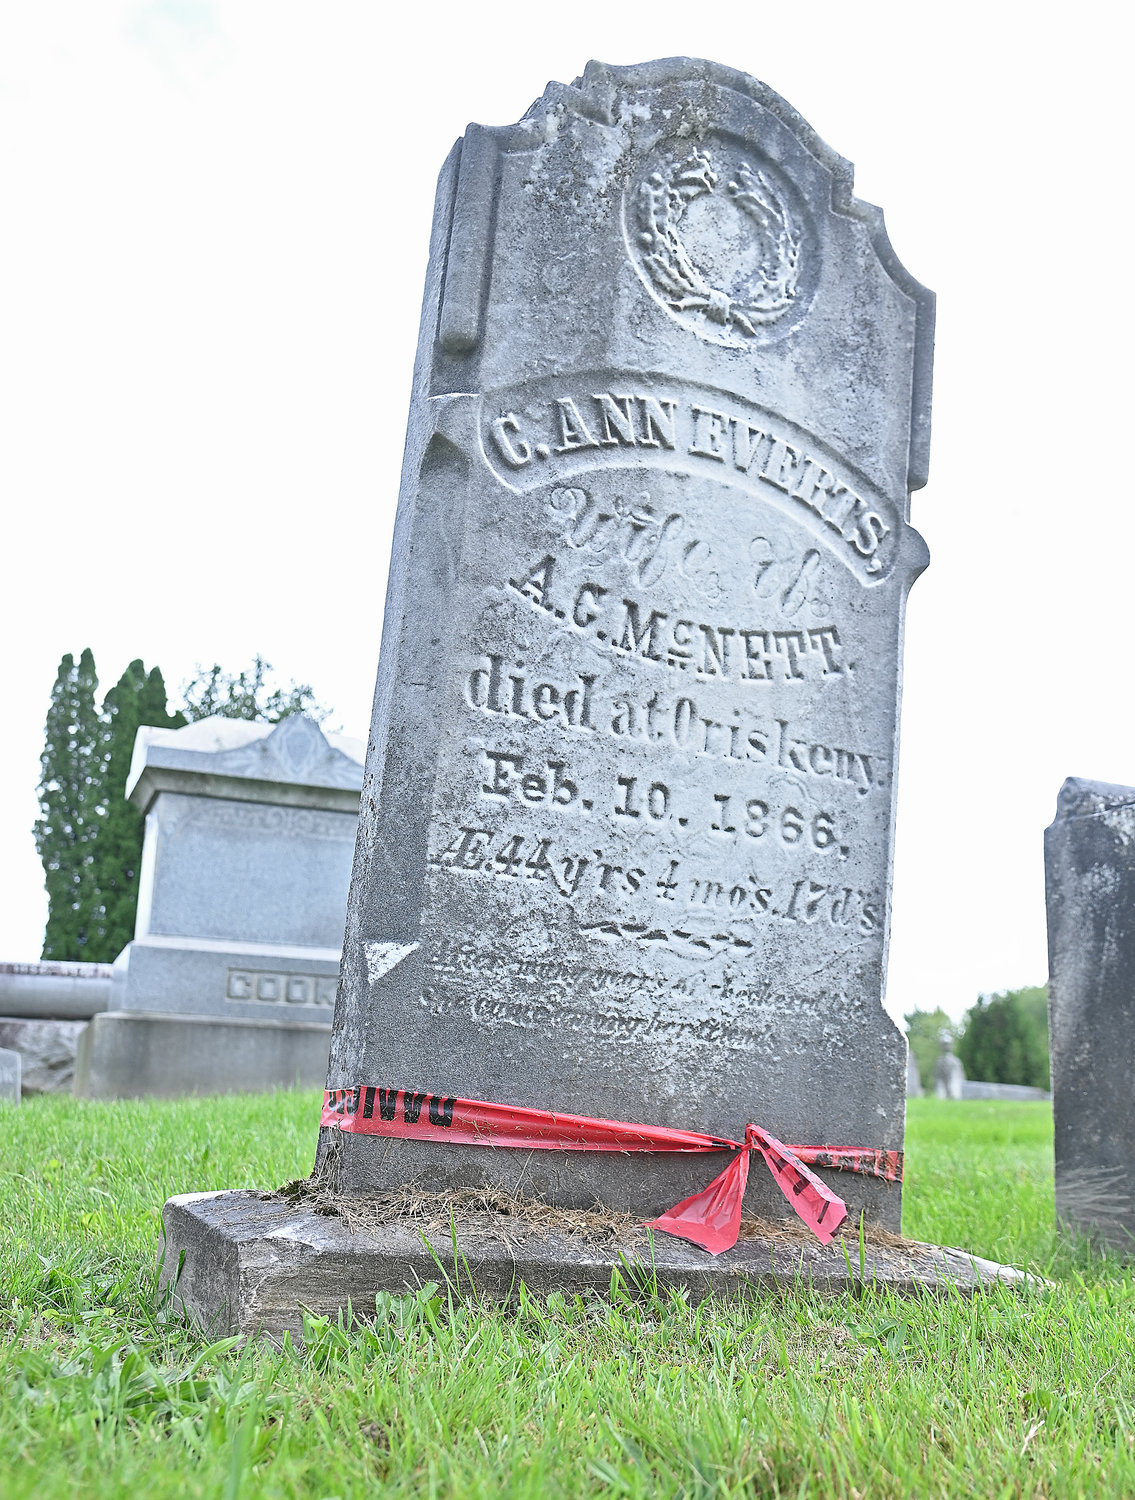 Headstone at the Oriskany Cemetery off Cider St. in the village that is very old and crooked and will be righted and reset along with many other headstones and monuments at the cemetery. Every monument that has a red ribbon on it will be fixed/corrected.